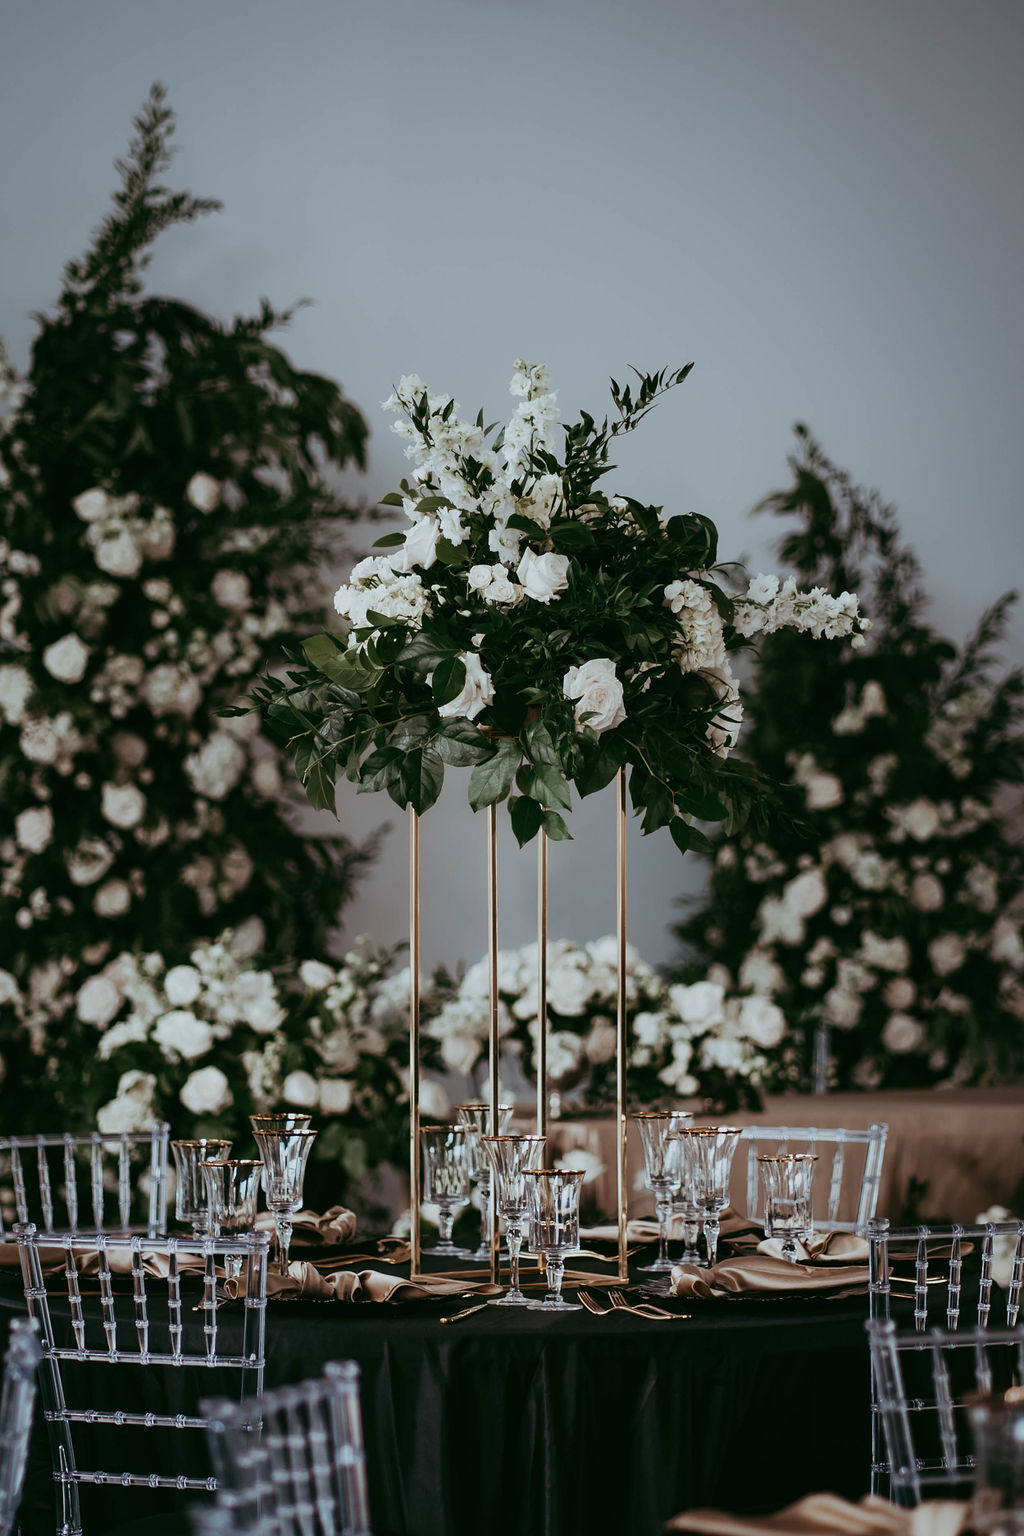 Black table linens, clear chiavari chairs, silk gold napkins, gold-rimmed clear glassware, modern arrangements with white florals and greenery, black and white wedding inspiration. 